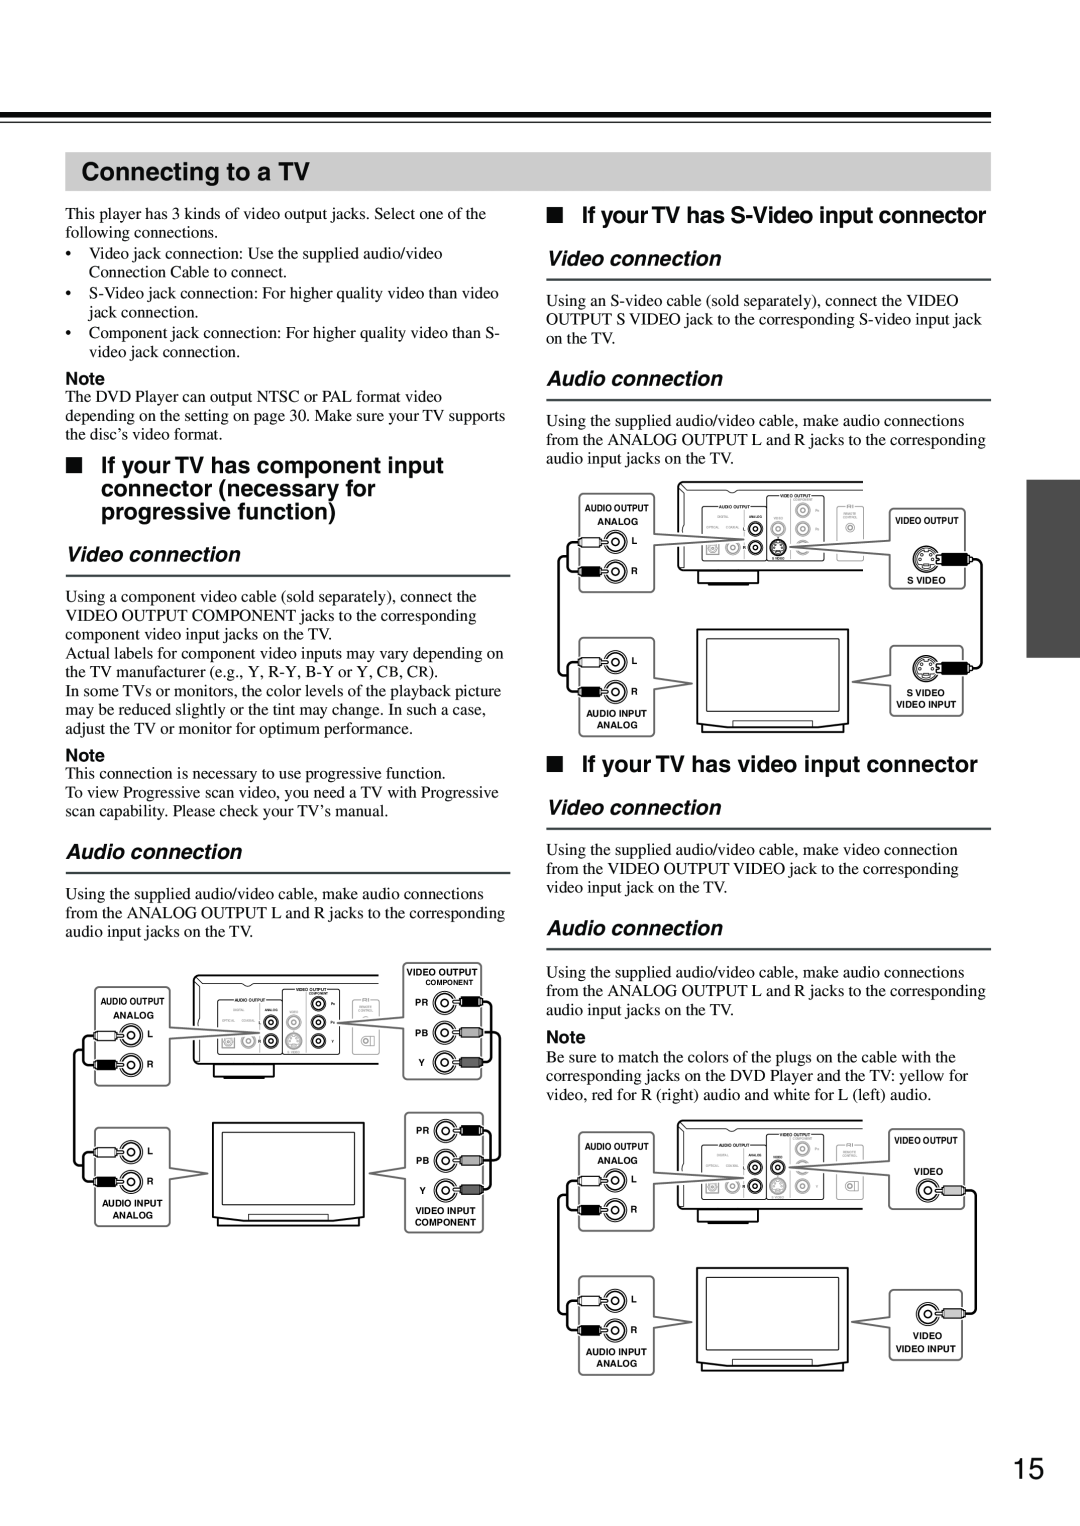 Onkyo DV-SP302 Connecting to a TV, If your TV has component input, connector necessary for, progressive function 